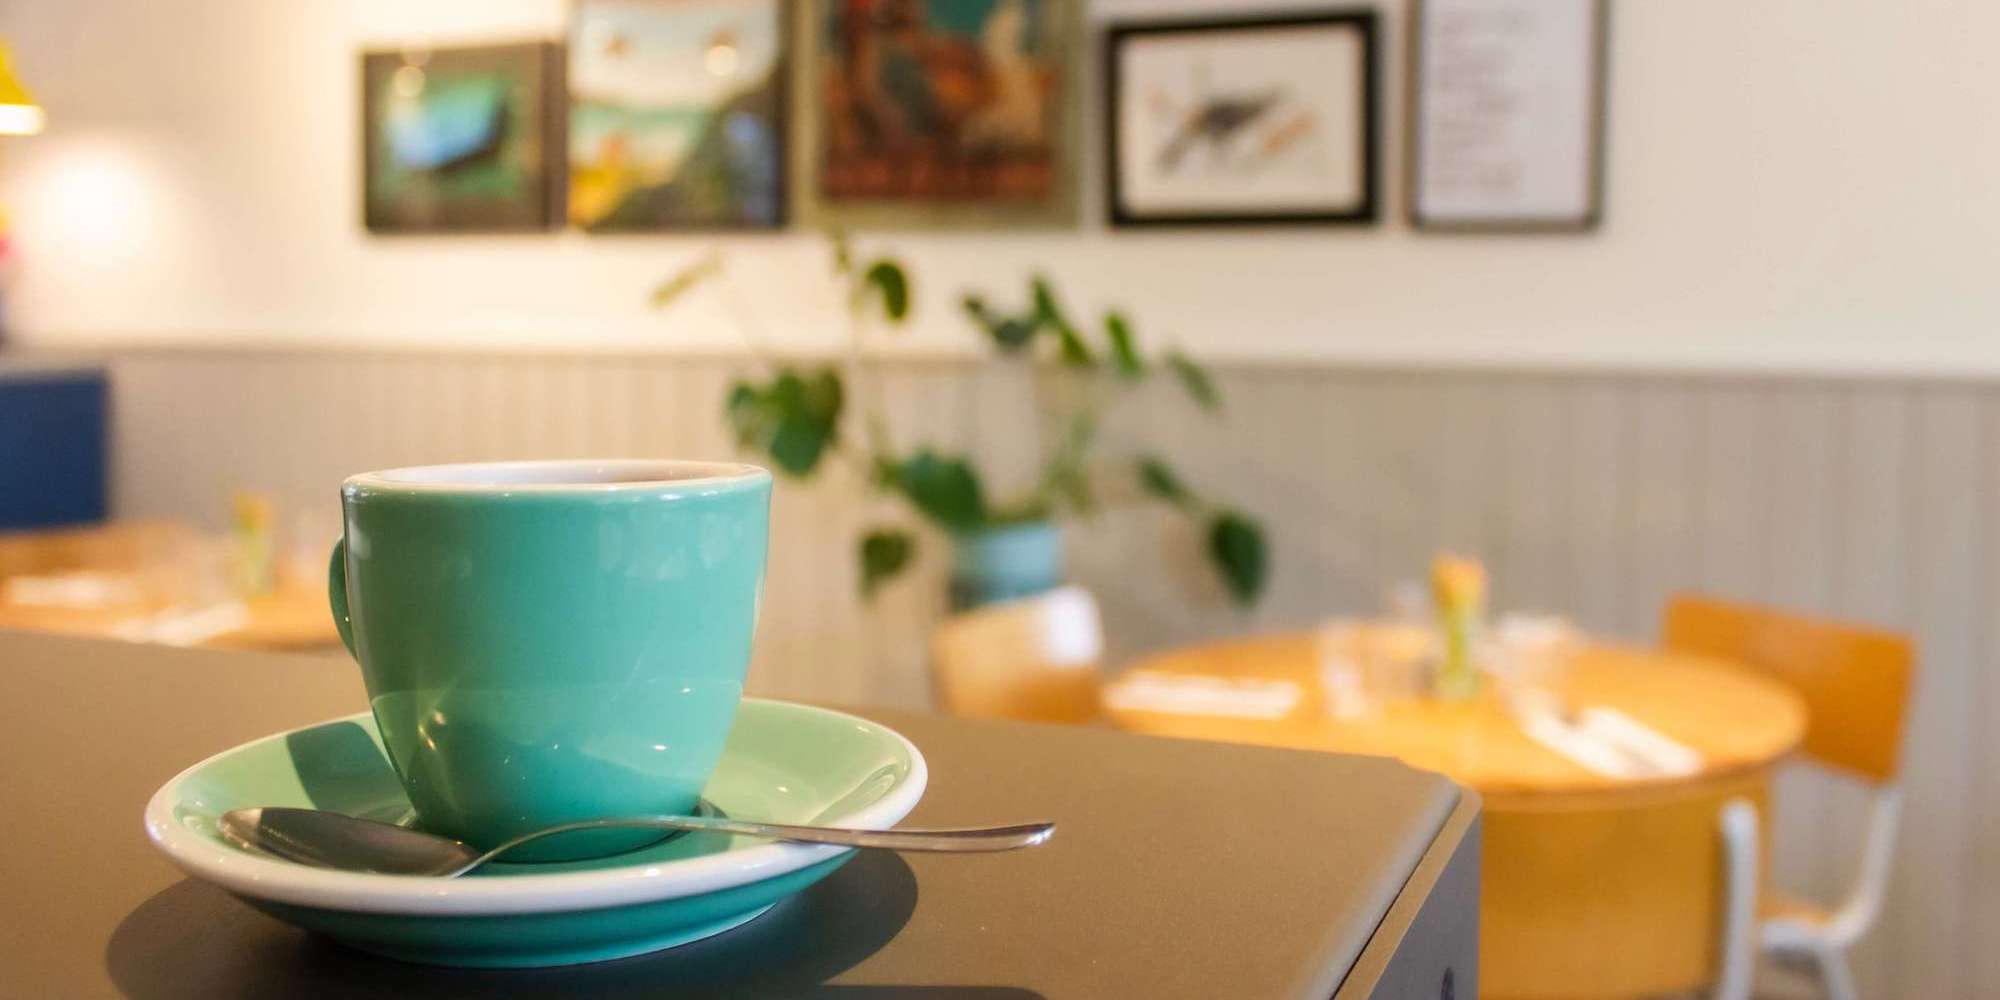 Photo showing a cup and saucer on a table in a cafe. Image from Unsplash (Photographer - Louis Hansel)